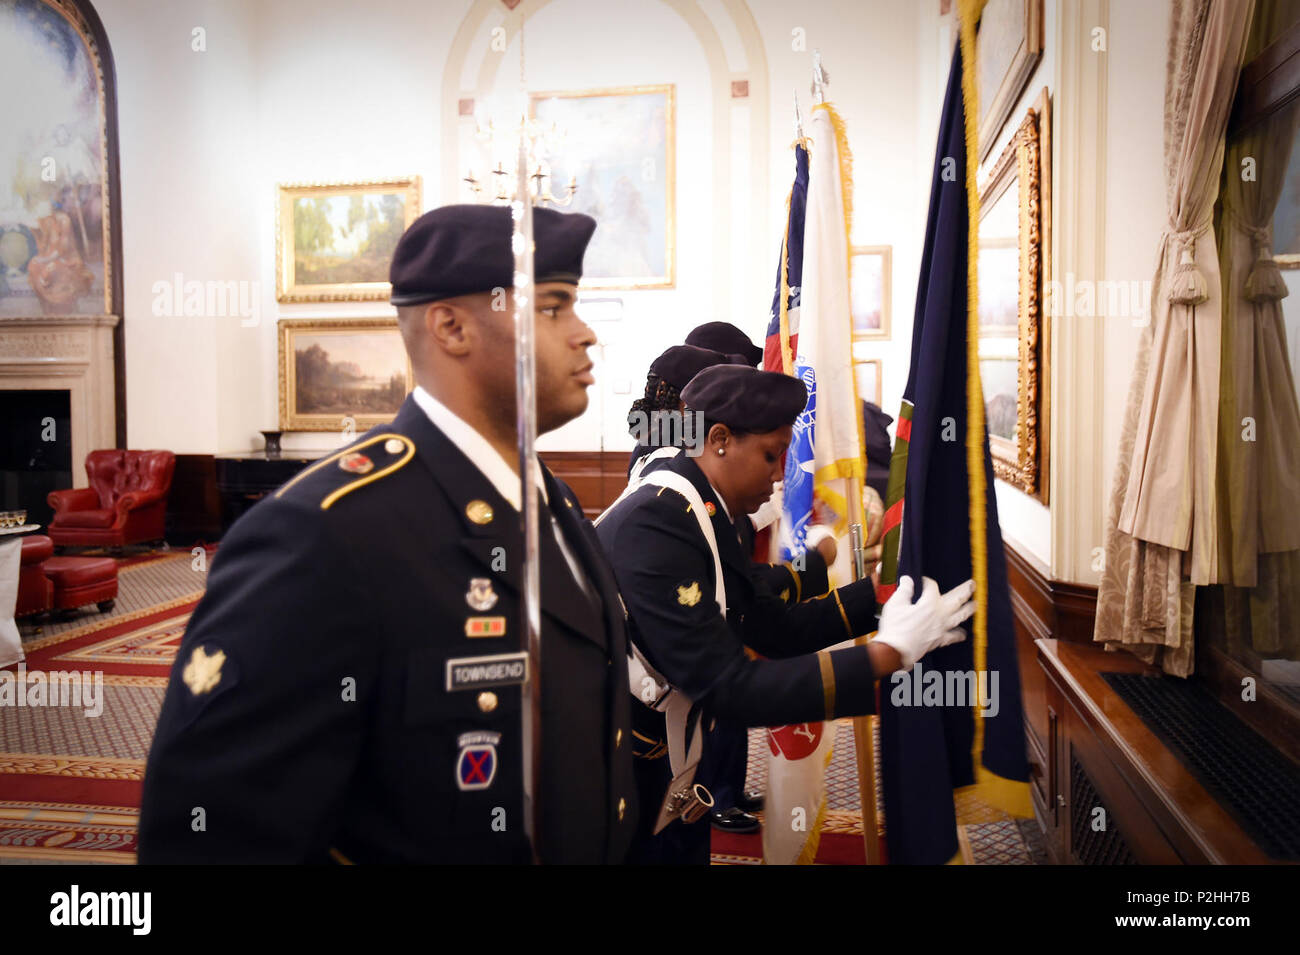 Army Reserve soldiers, assigned to the 85th Support Command, present the colors during the 70th reunion of Easy Company, 2nd Battalion, 506th Parachute Infantry Regiment, 101st Airborne Division at the Union League Club of Chicago, September 24, 2016. The famed Easy Company became widely known in part due to an HBO mini series called Band of Brothers. The 506th PIR was an experimental airborne regiment created in 1942 in Toccoa, Georgia that served in World War II.  (U.S. Army photo by Sgt. Aaron Berogan/Released) Stock Photo